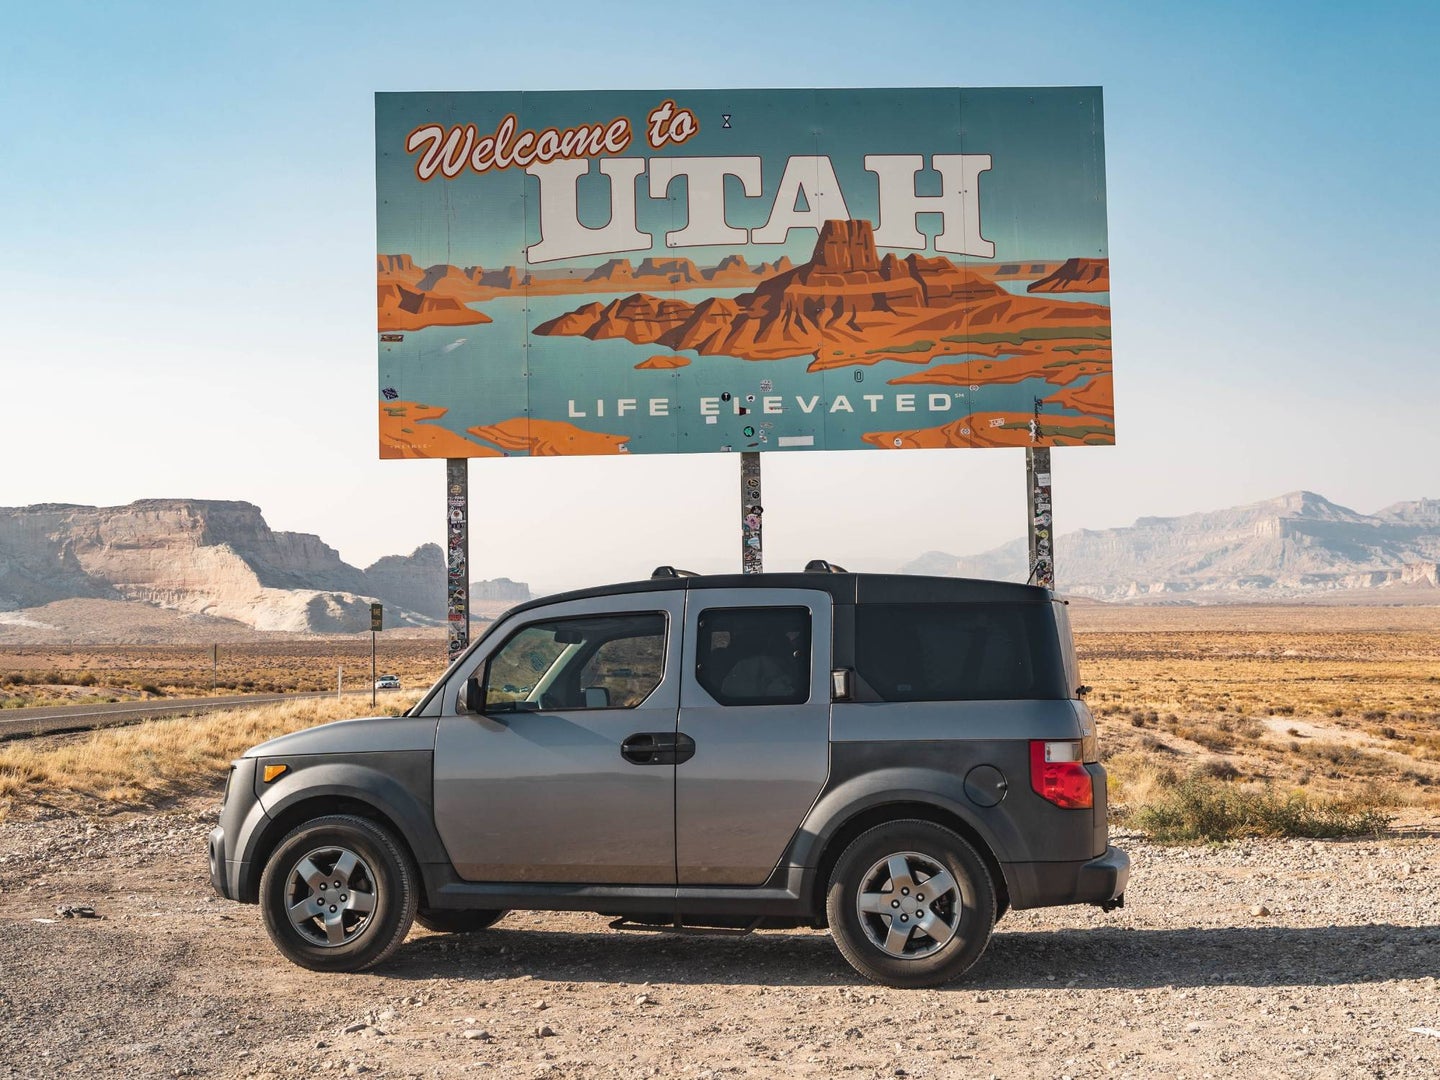 honda element suv in front of welcome to utah sign